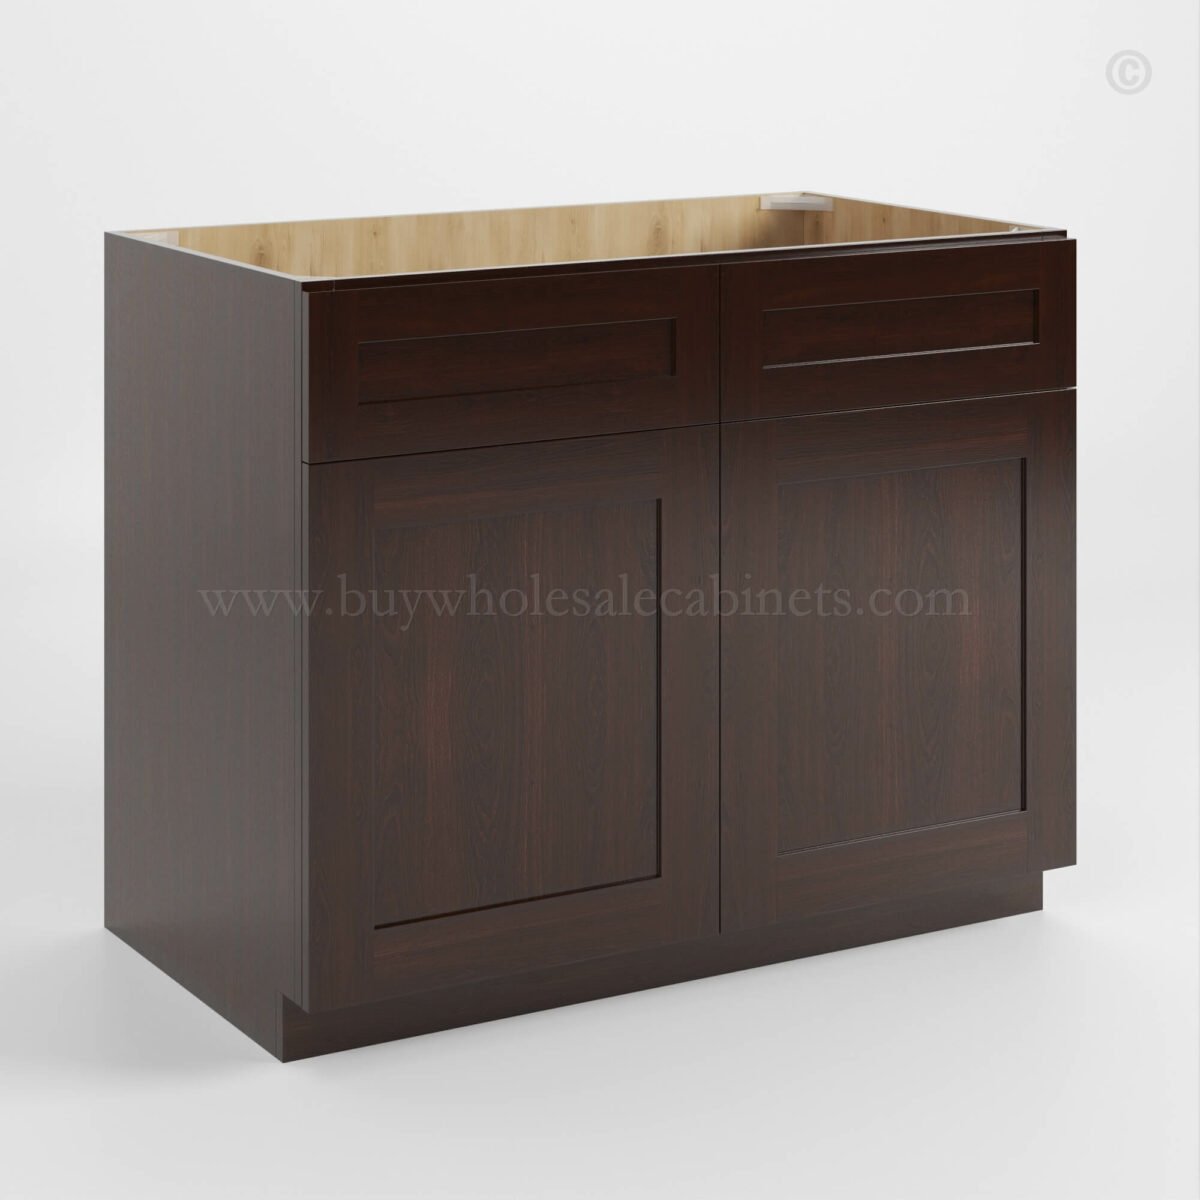 Shaker Espresso Base Cabinet with Double Doors and Drawers